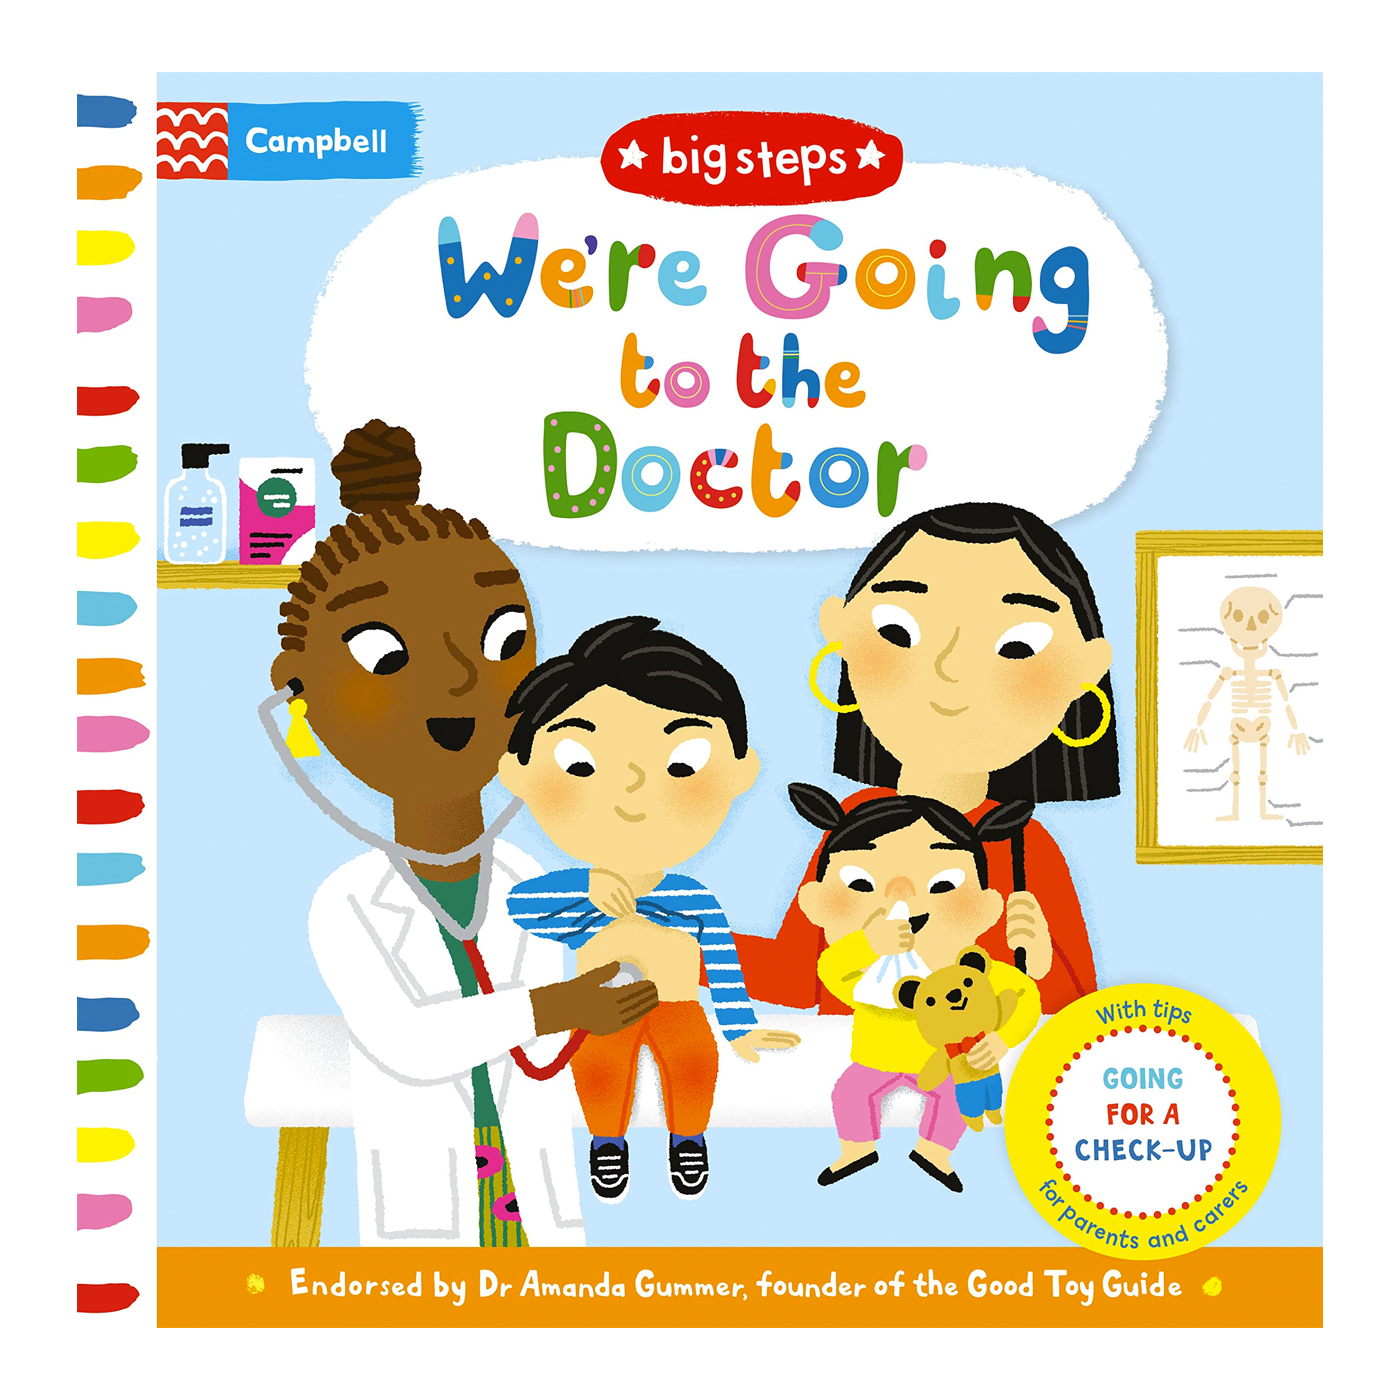  We're Going to the Doctor